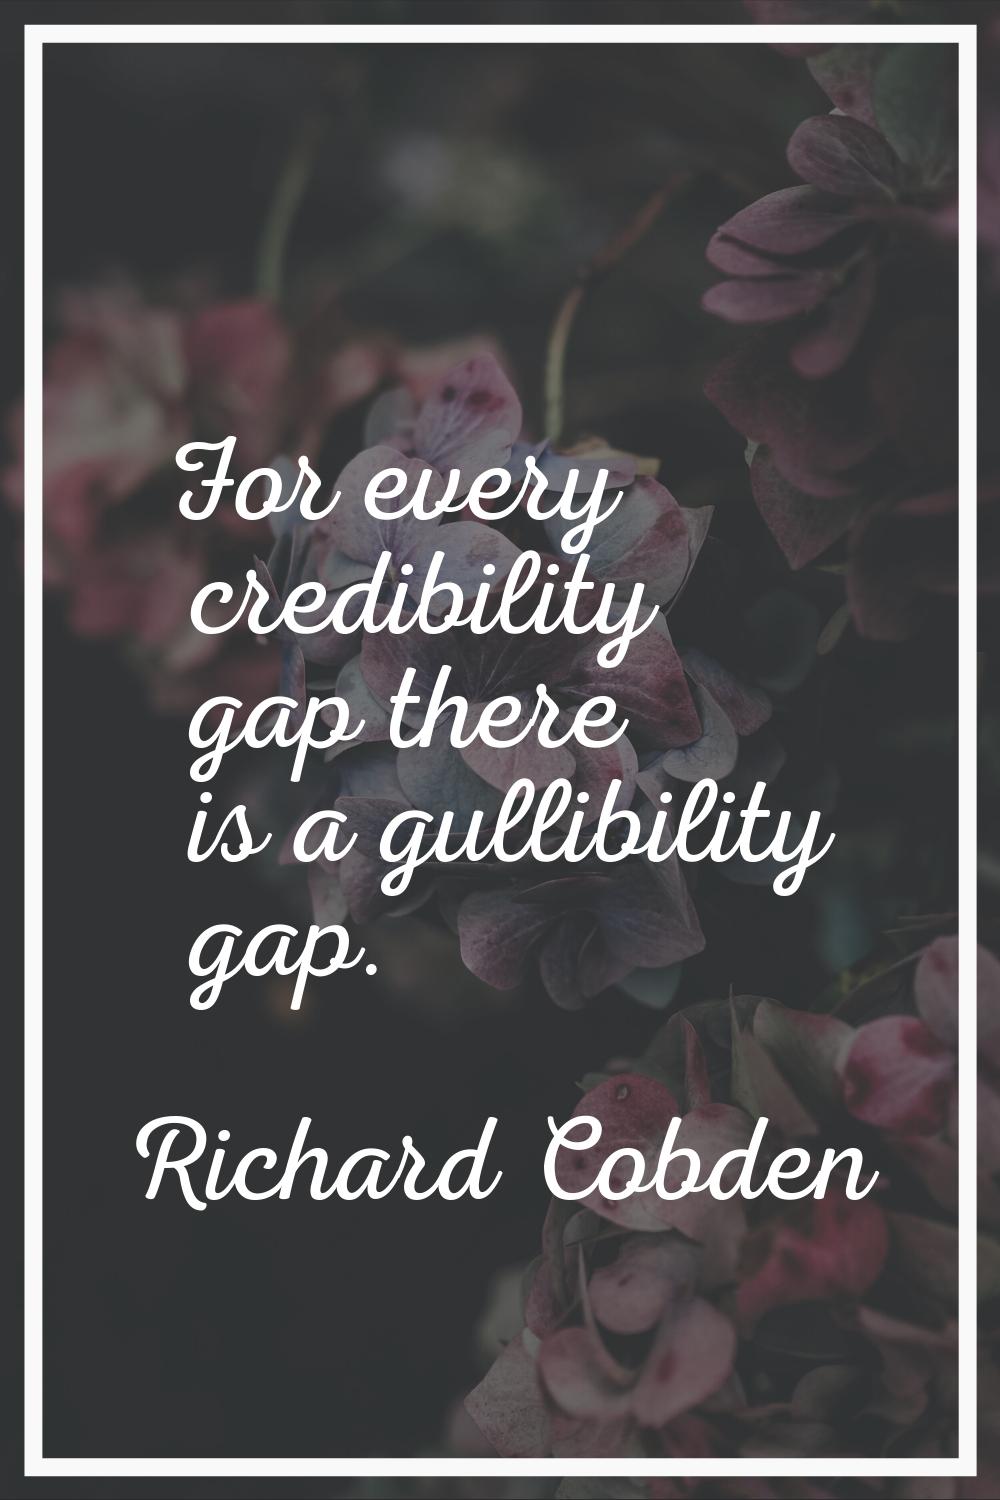 For every credibility gap there is a gullibility gap.